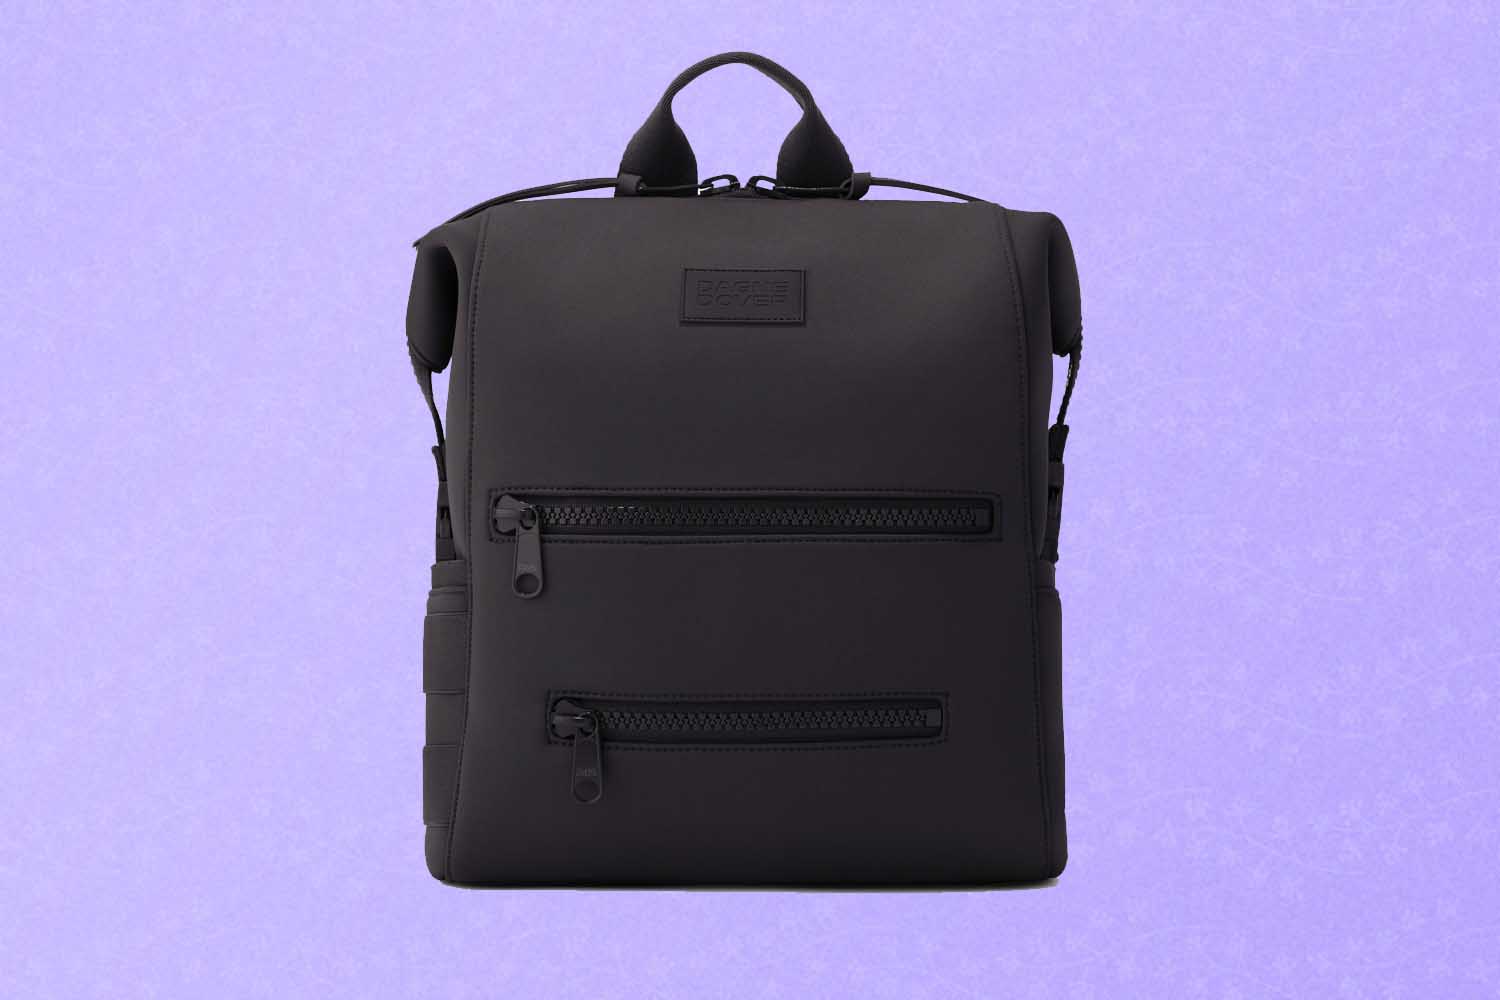 A black diaper bag, a perfect Mother's Day gift for 2022, on a purple background.